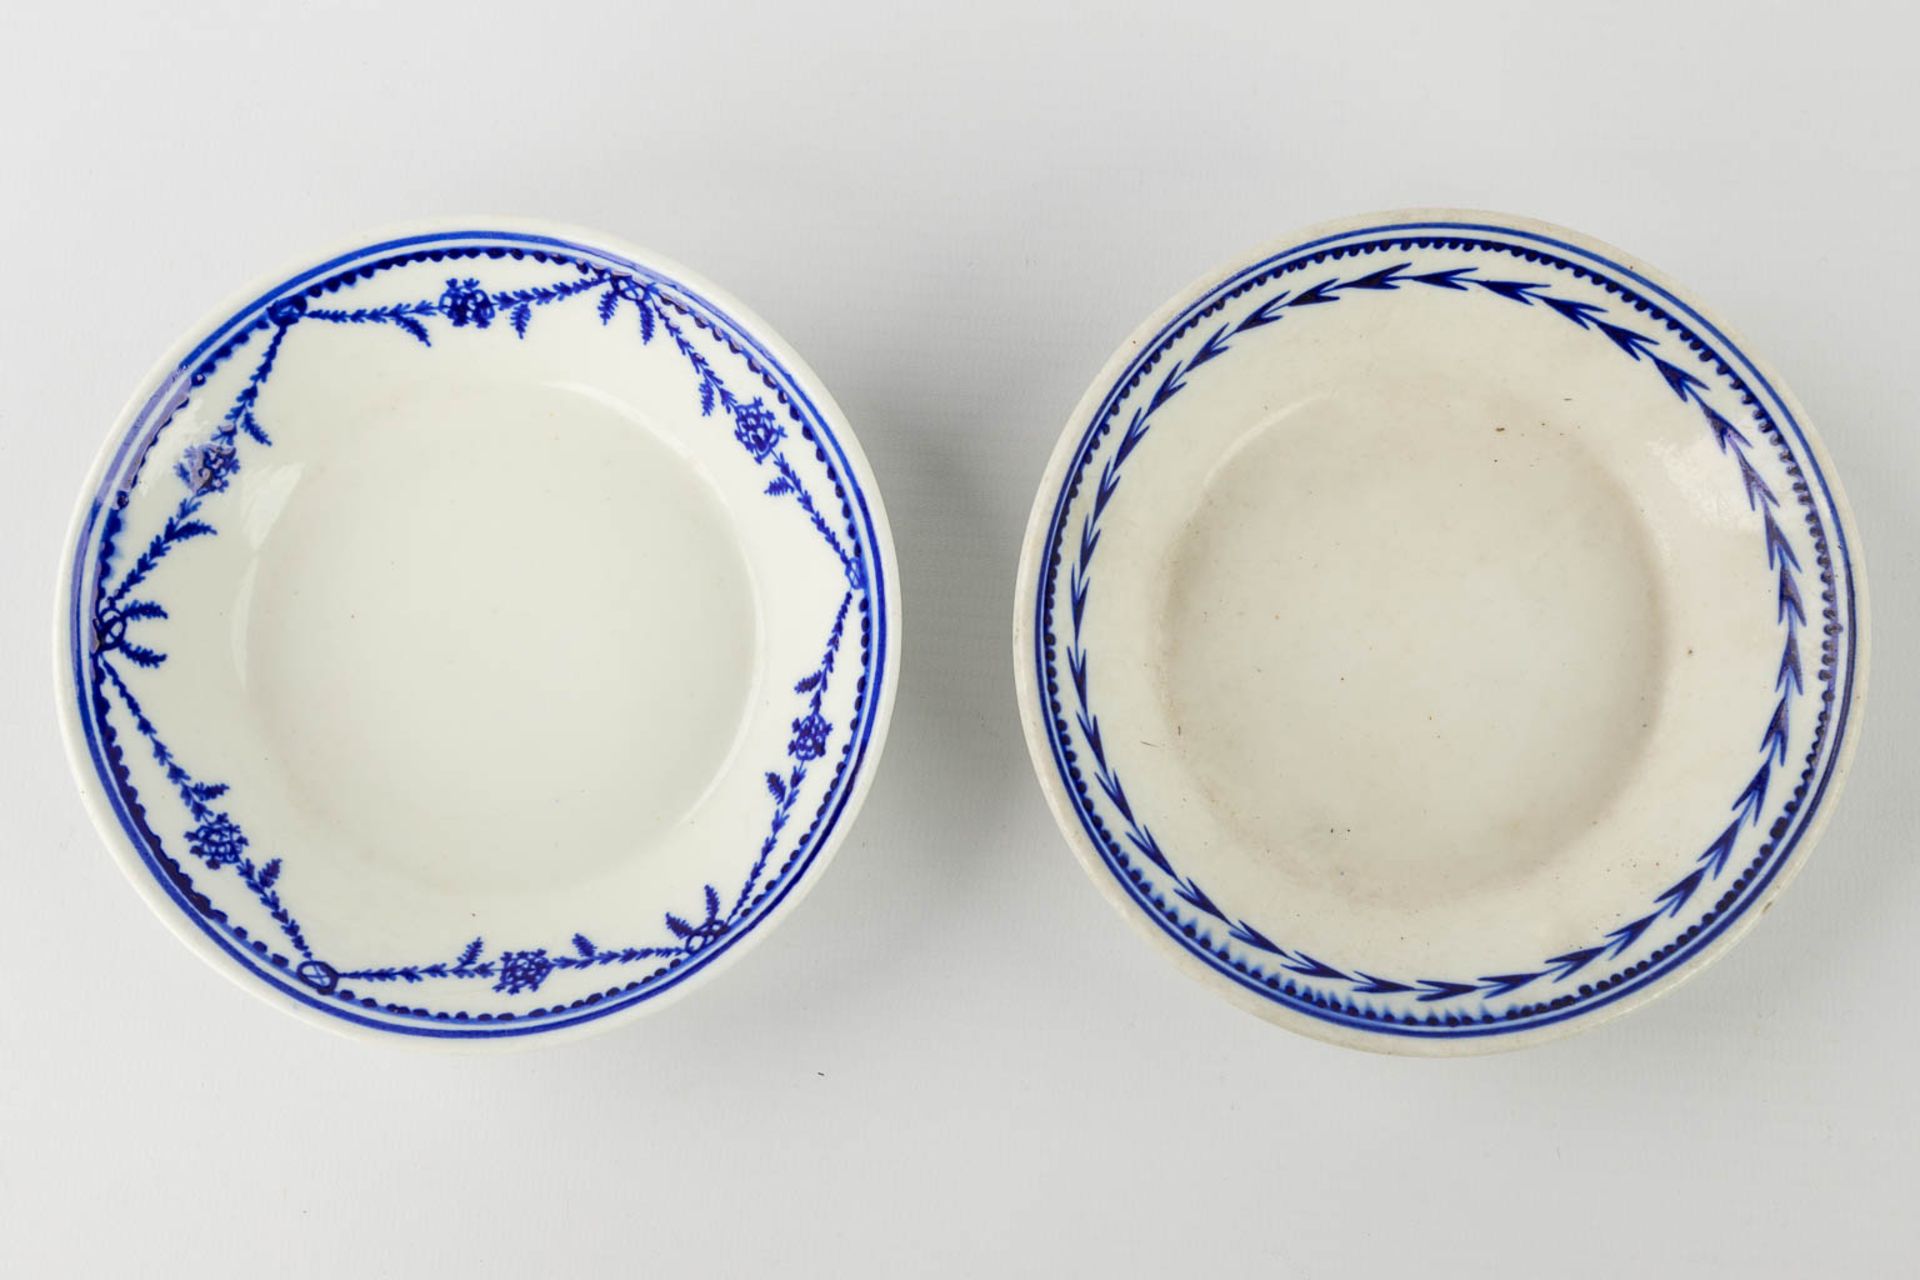 Tournai ceramics, a very large collection of faience plates, saucers and serving accessories. 174 pi - Image 20 of 21